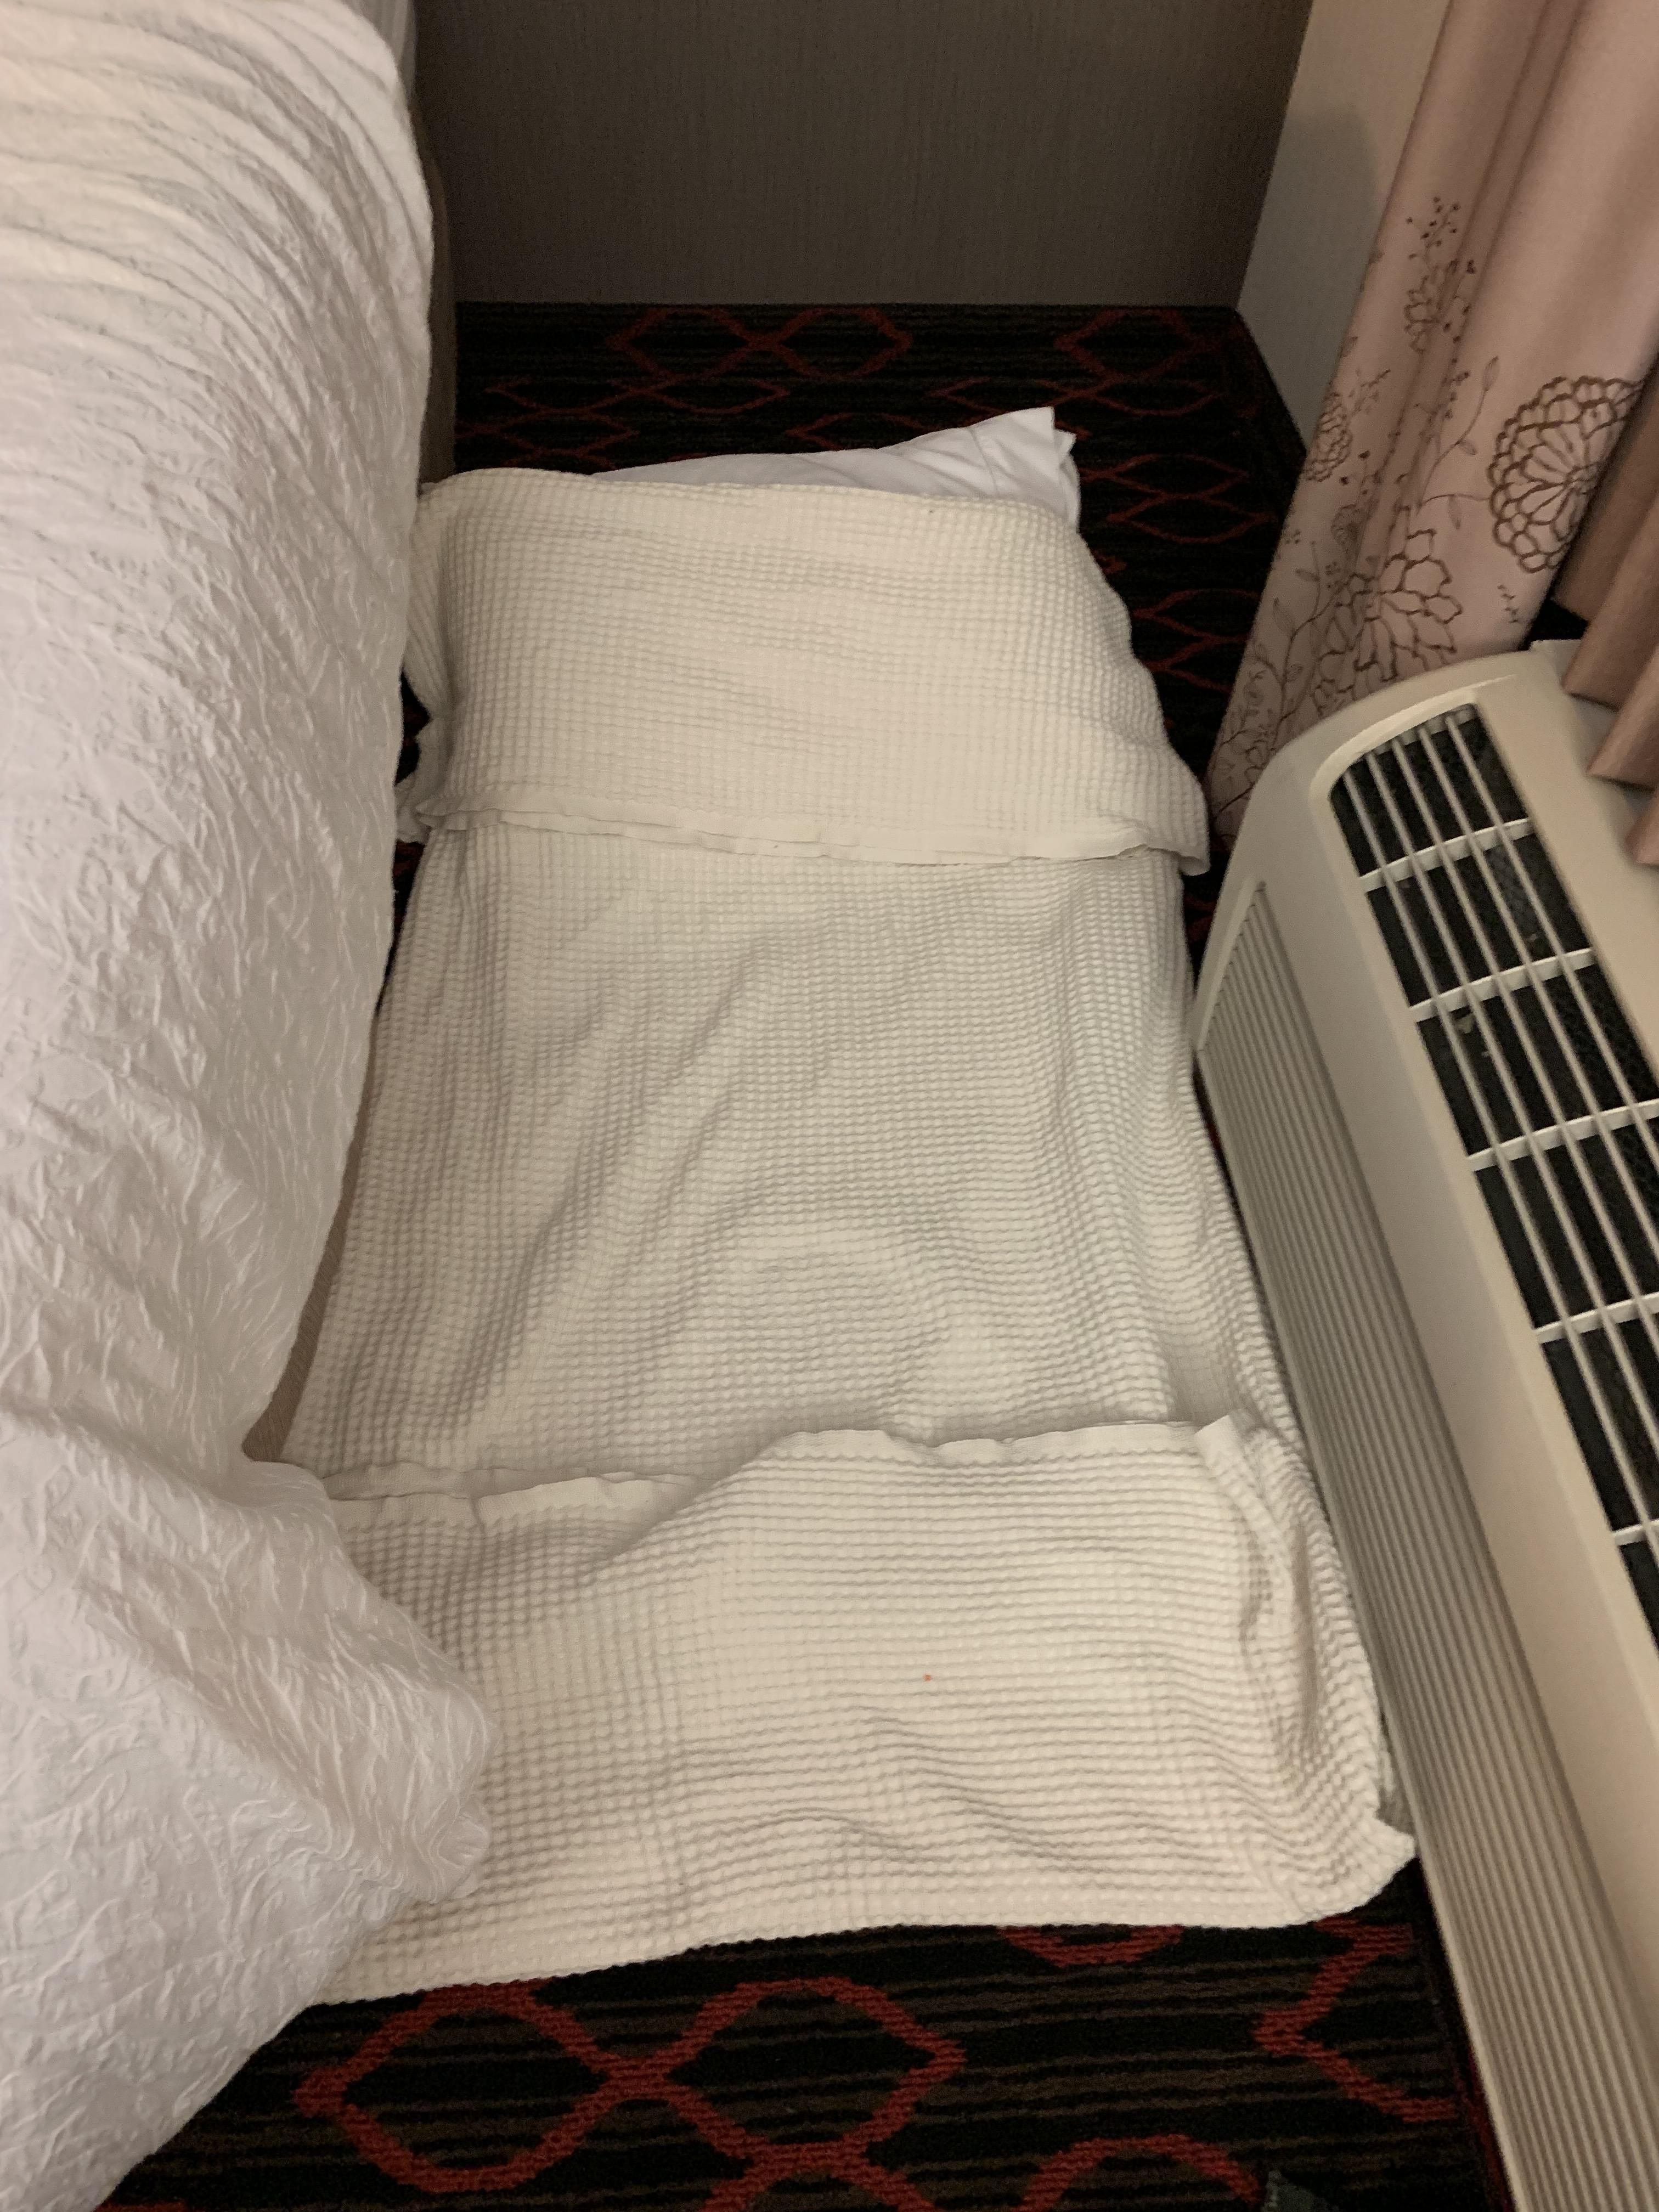 Our hotel was short a bed so I made one out of towels. Housekeeping made it up along with the other beds when we were out.